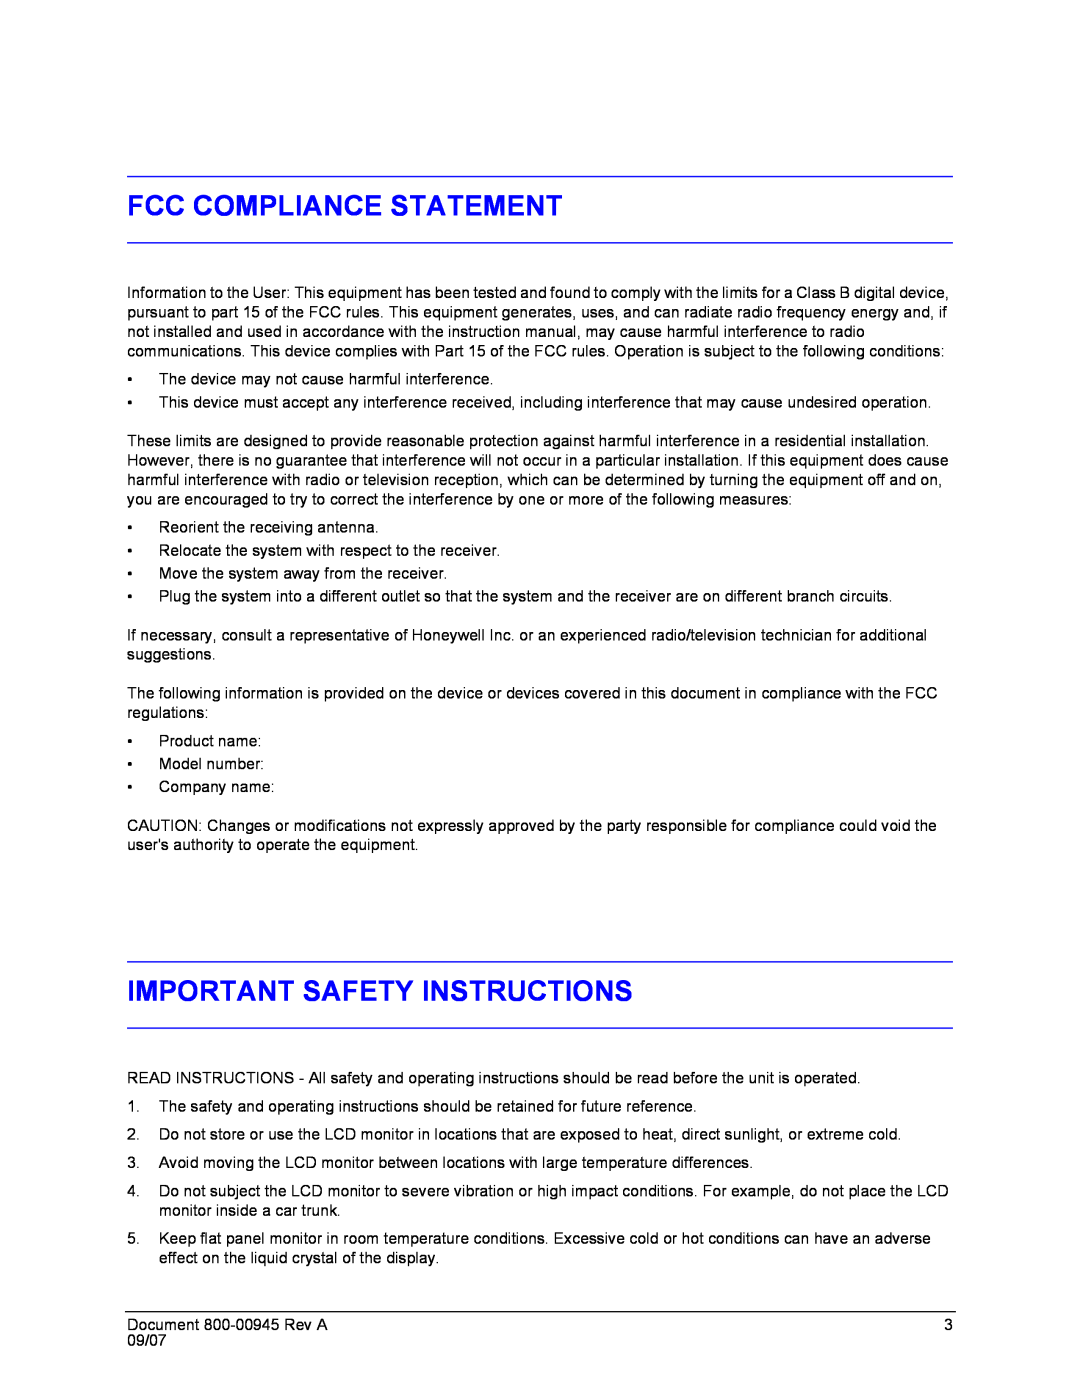 Honeywell HMLCD19L, HMLCD17L user manual Fcc Compliance Statement, Important Safety Instructions 